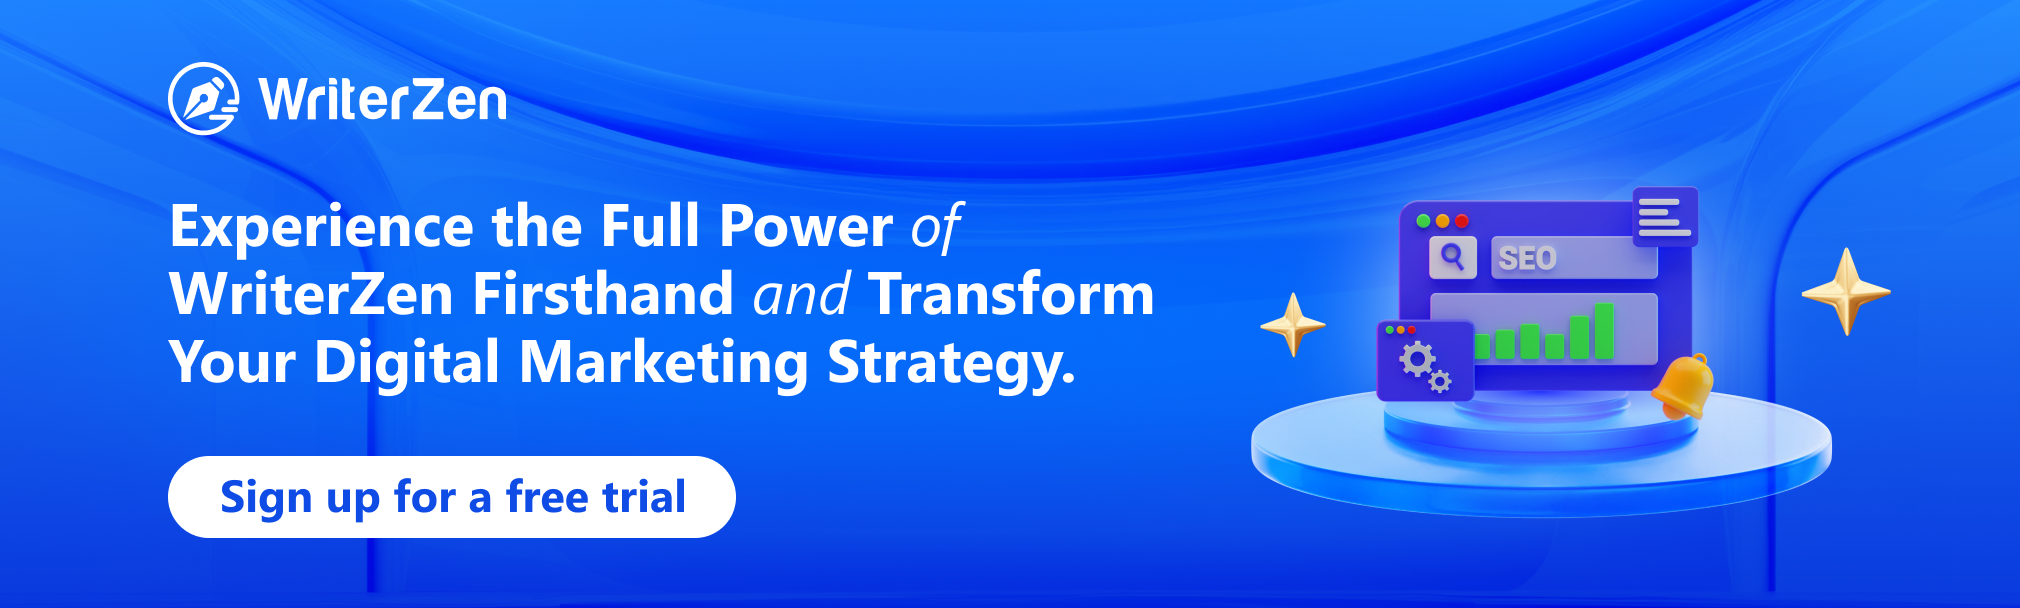 Experience the Full Power of WriterZen Firsthand and Transform Your Digital Marketing Strategy.